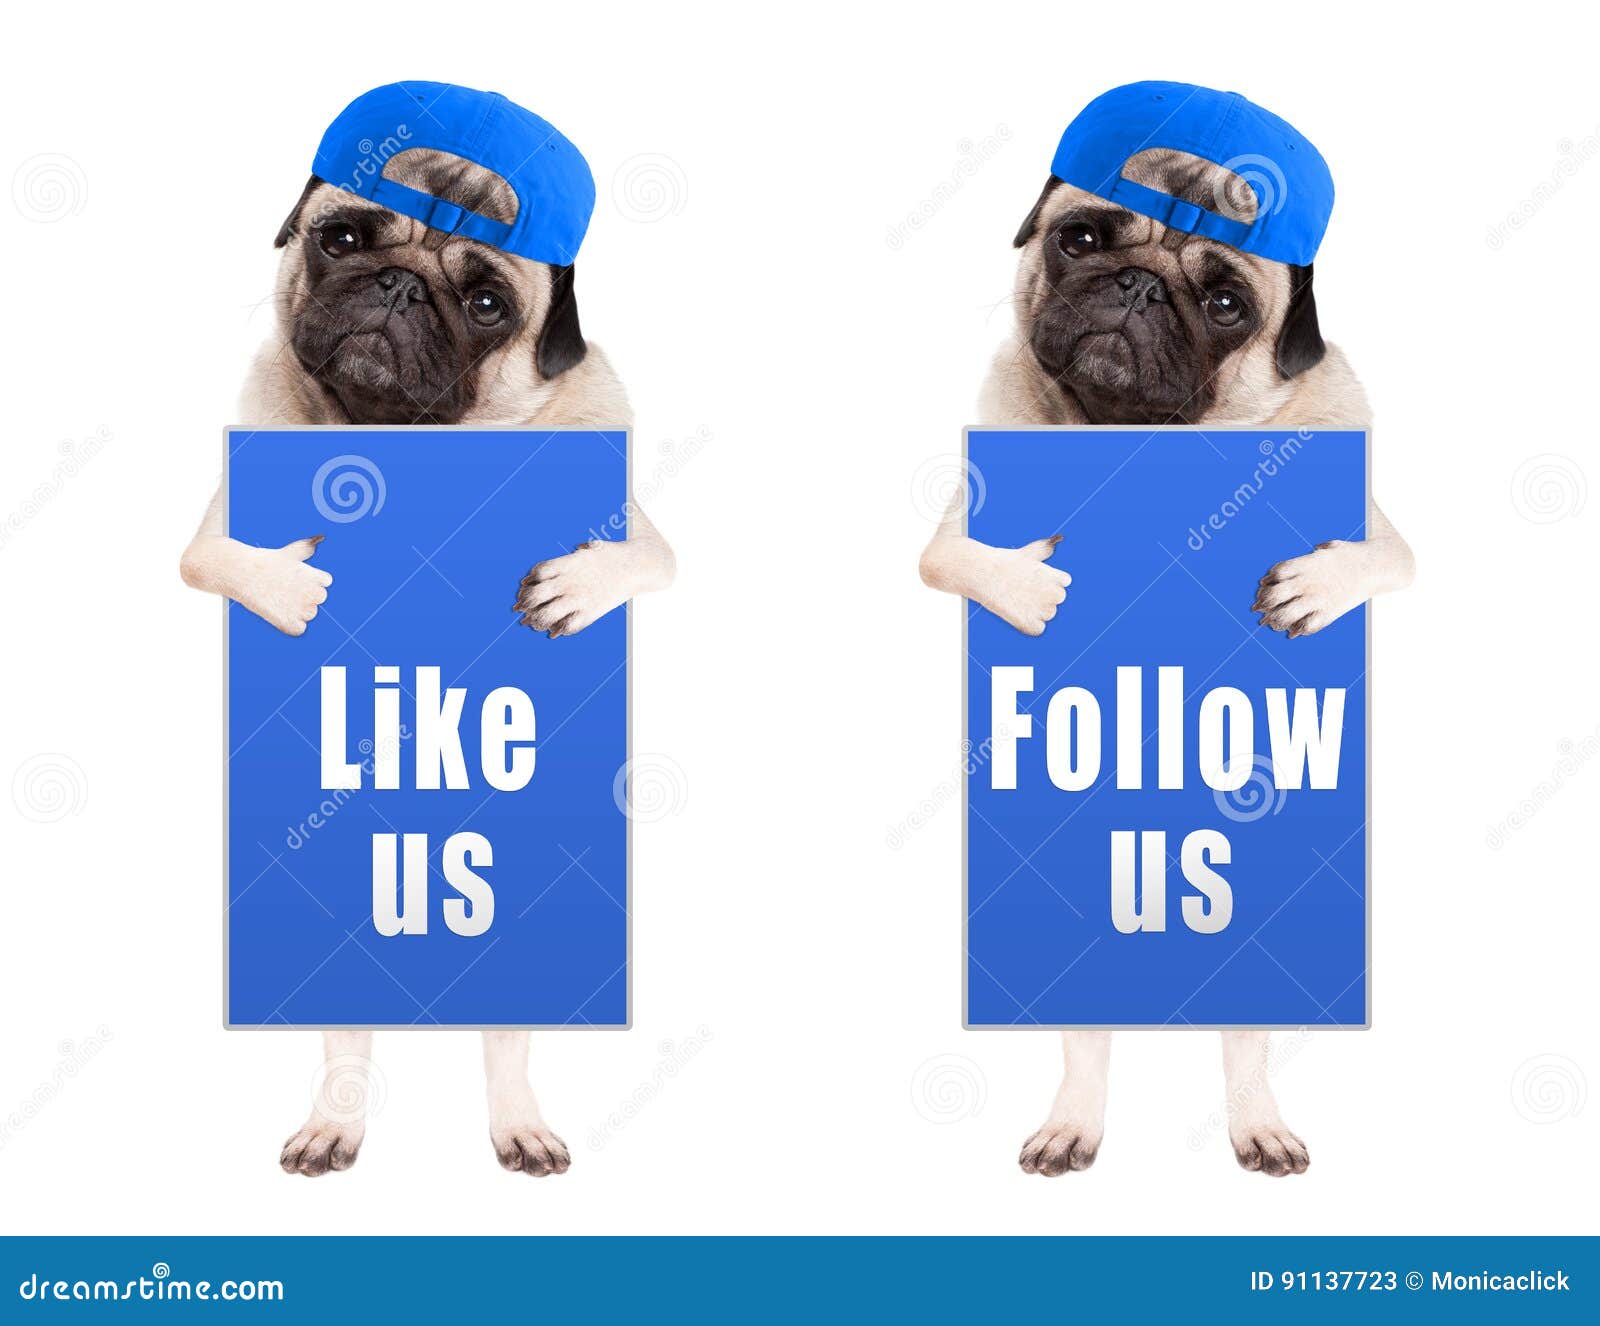 smart pug puppy dog with blue follow us and like us sign and wearing blue cap,  on white background